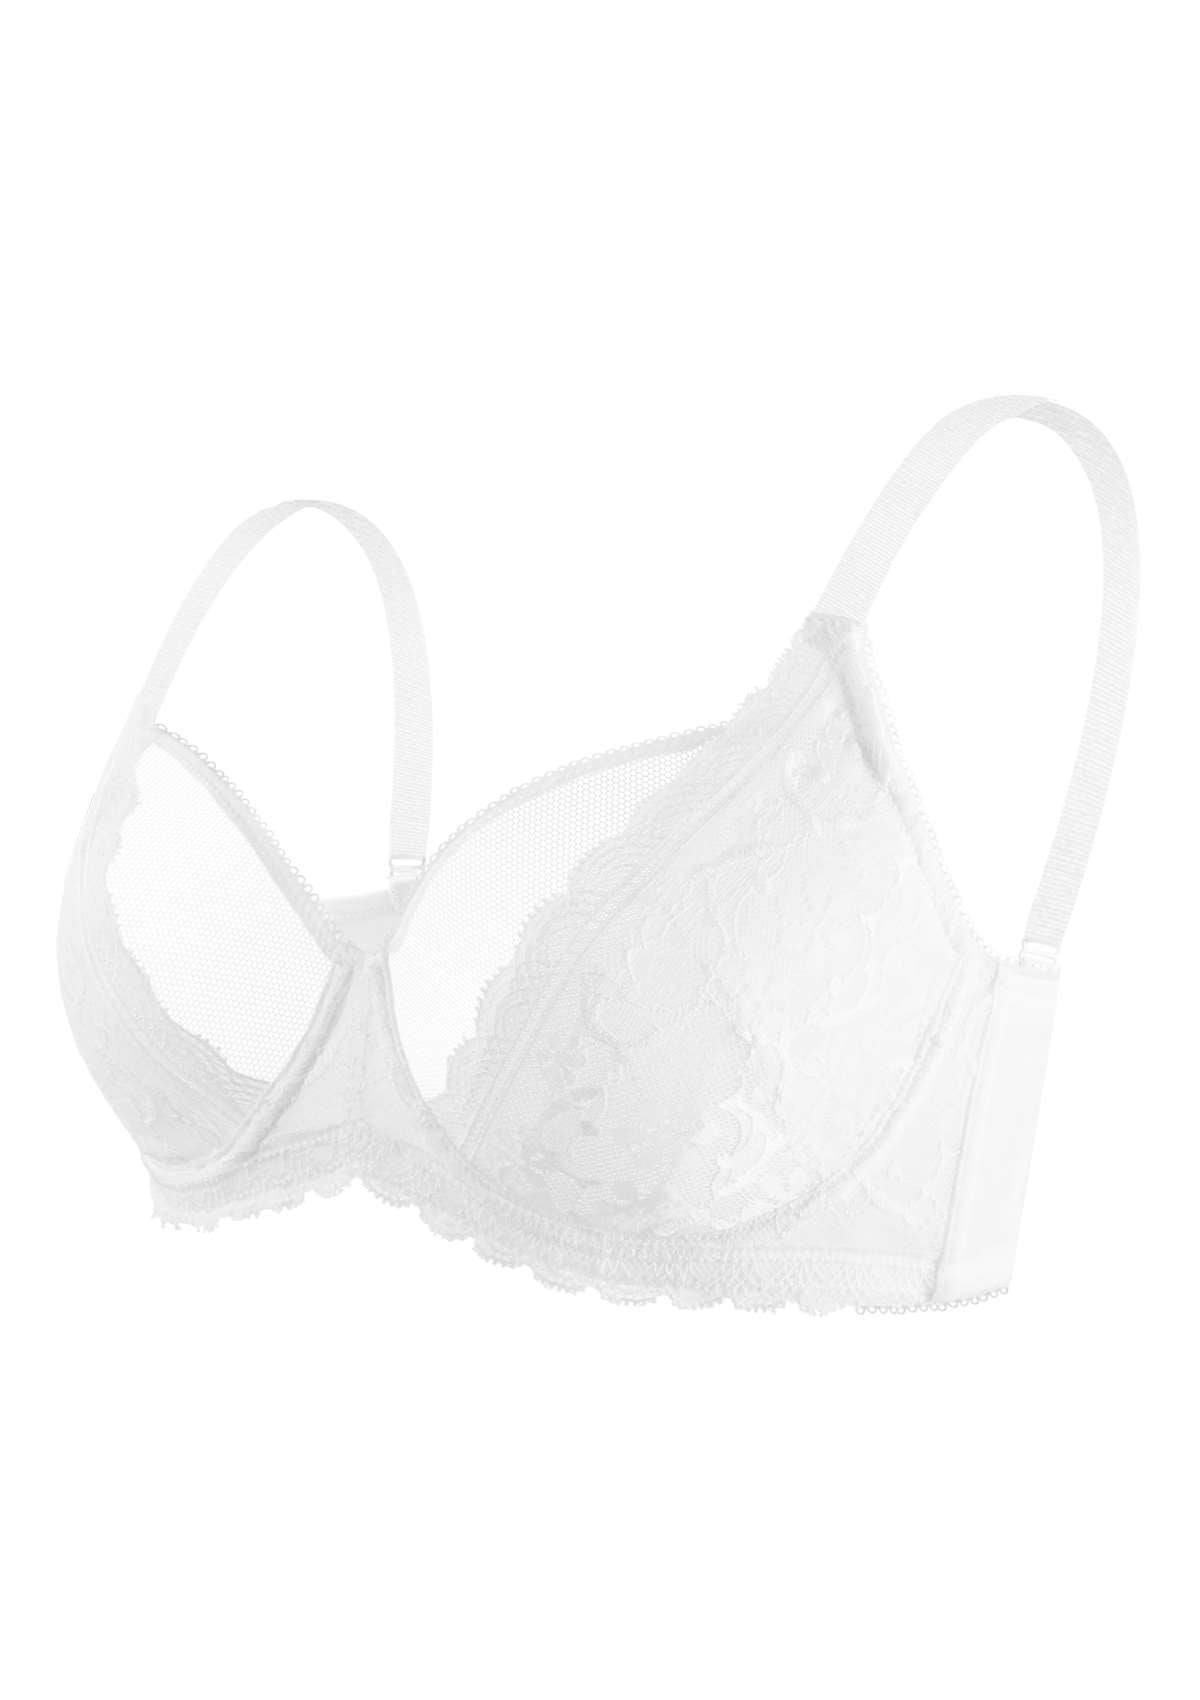 HSIA Anemone Big Bra: Best Bra For Lift And Support, Floral Bra - Burgundy / 38 / DD/E